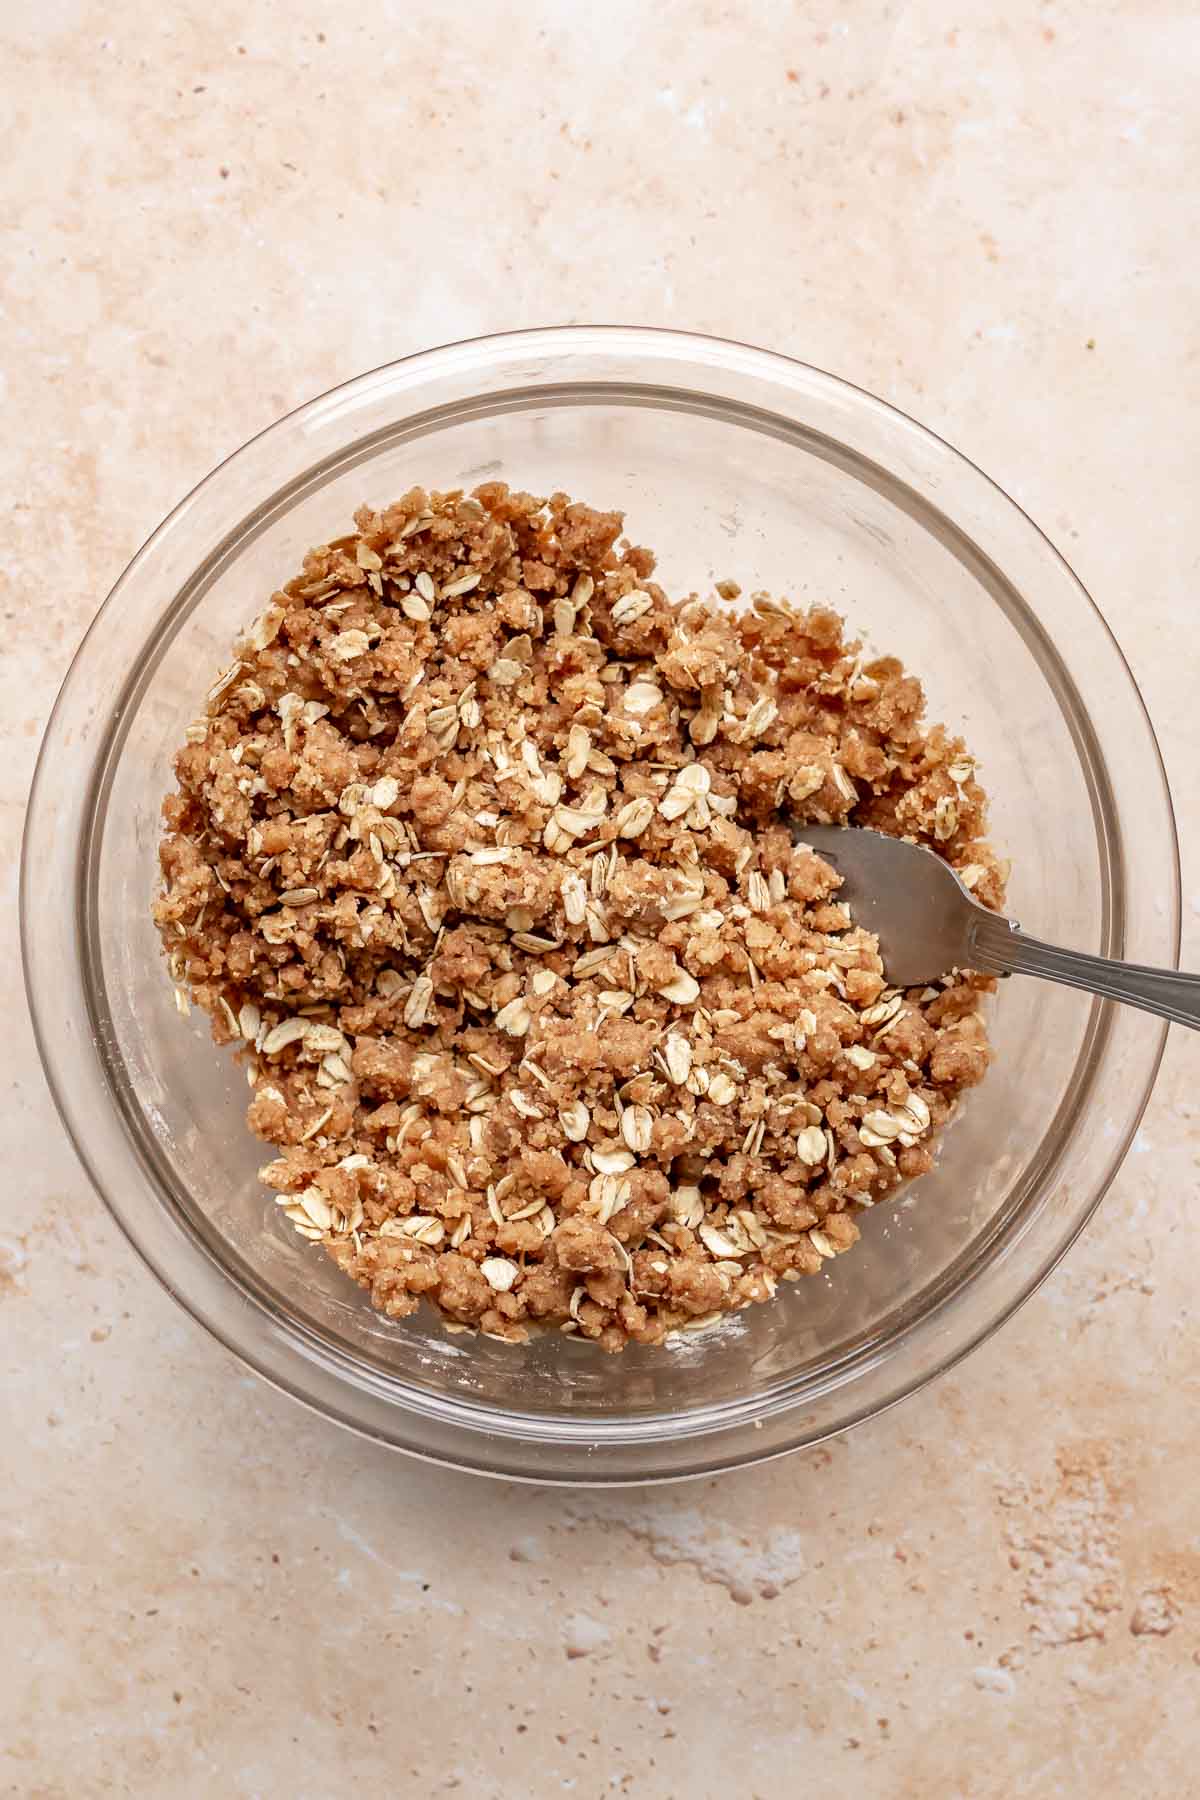 Crumble topping mixed in a bowl with a fork.